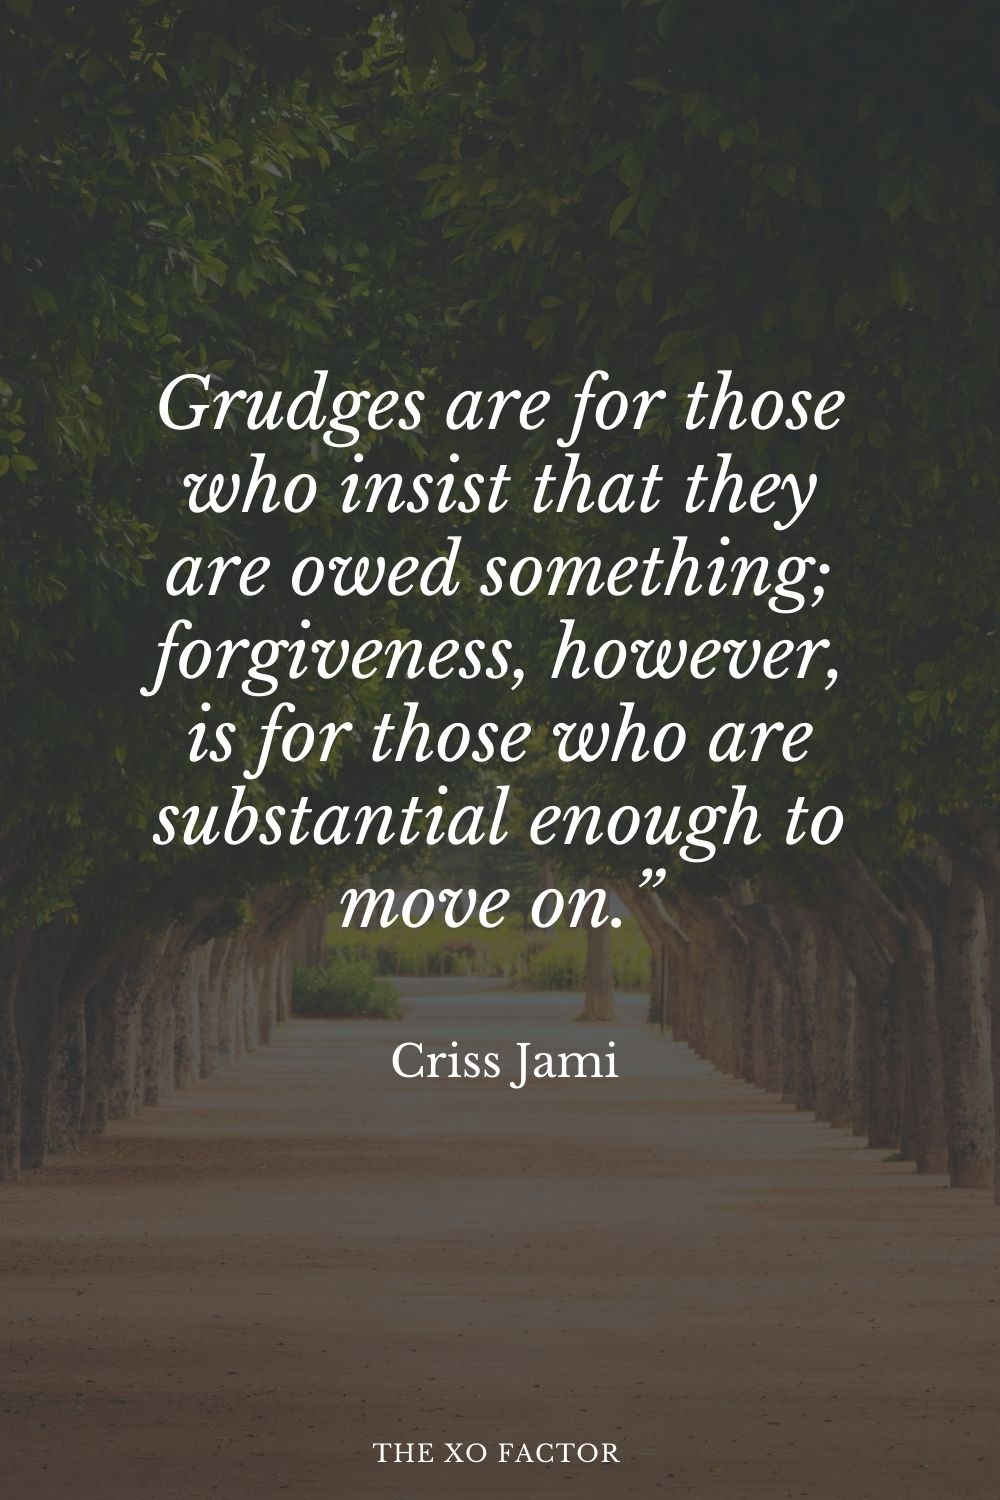 Grudges are for those who insist that they are owed something; forgiveness, however, is for those who are substantial enough to move on.” Criss Jami